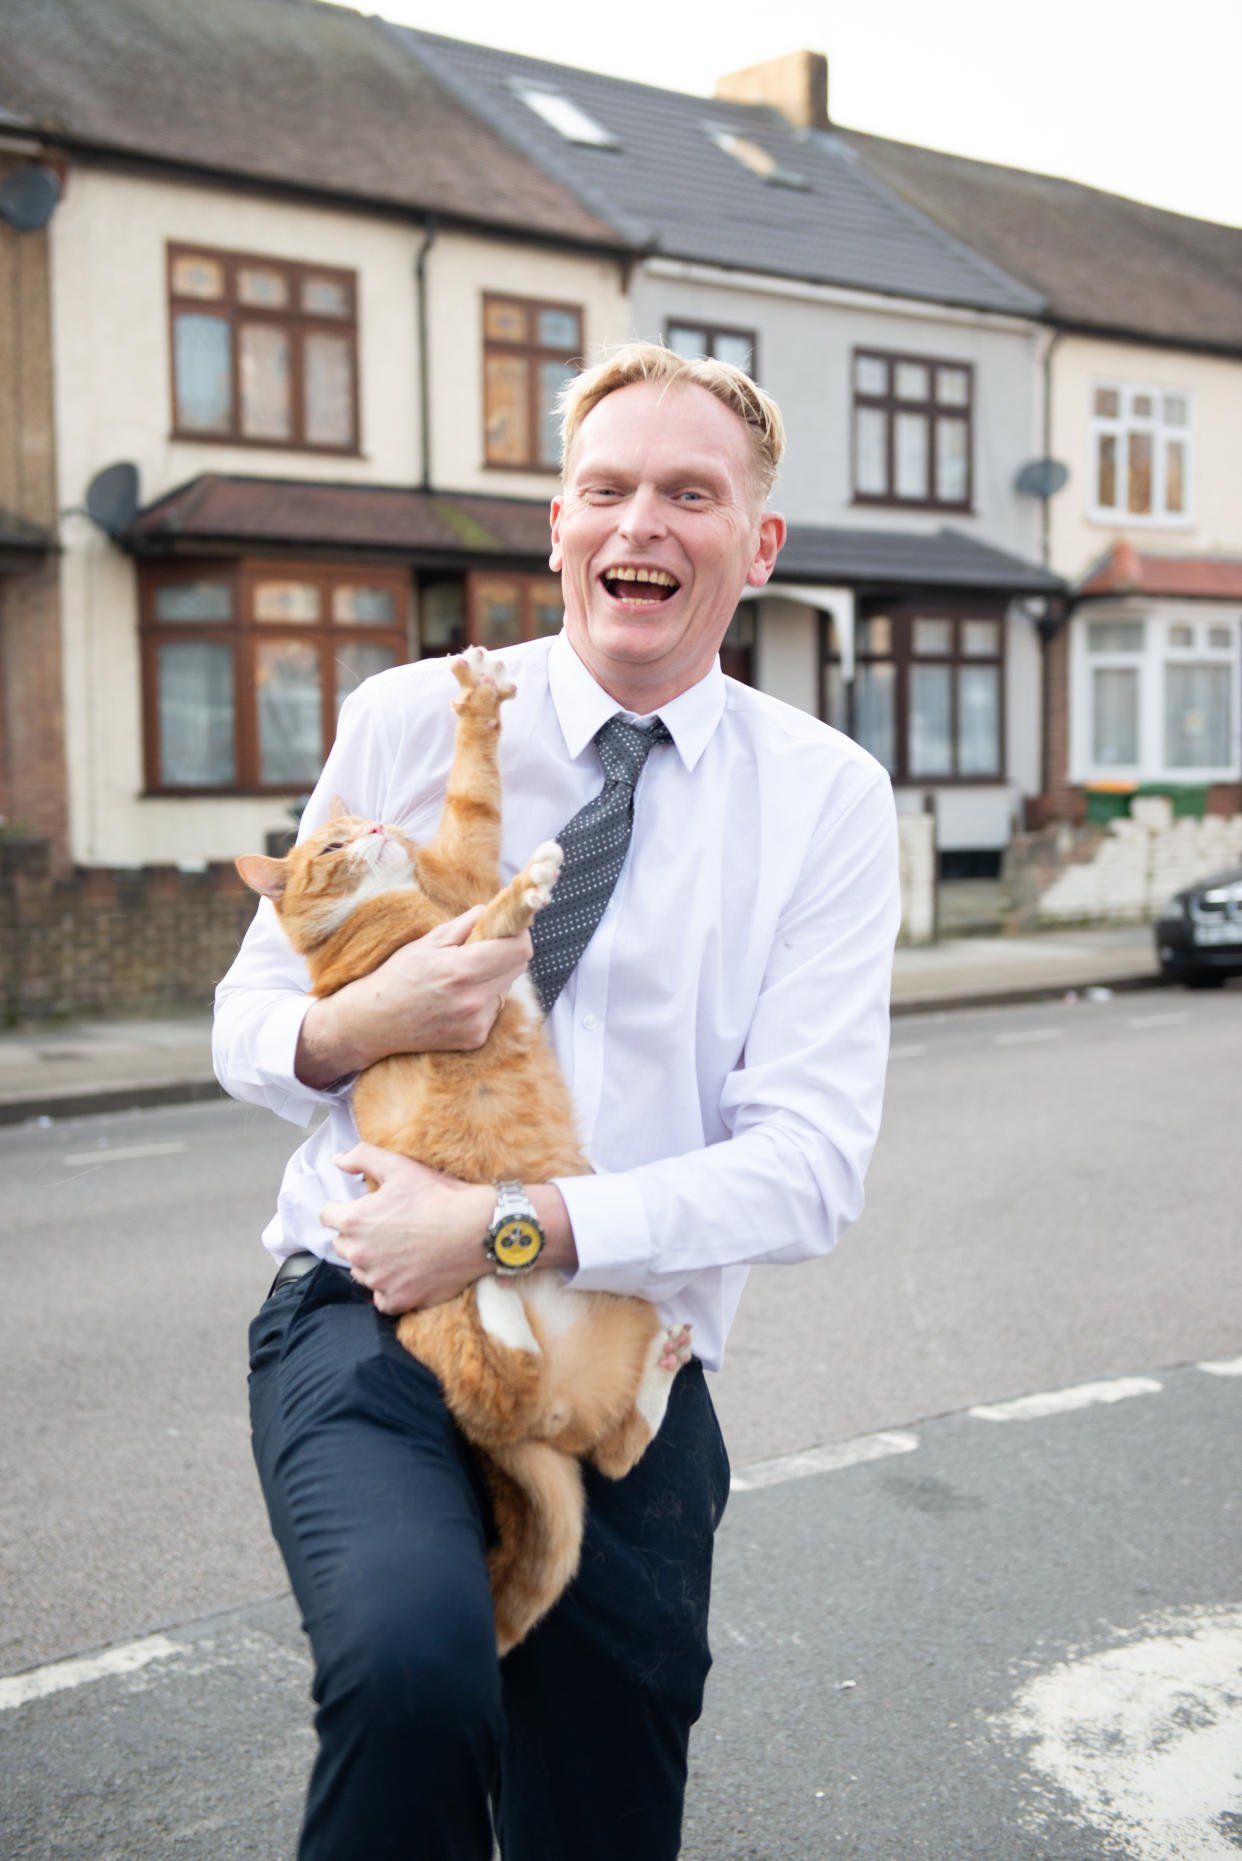 Andy Kindell, 52, bought moggy Alex a special £130 collar with a GPS tracking chip so he could monitor the cat's location via an app on his phone.